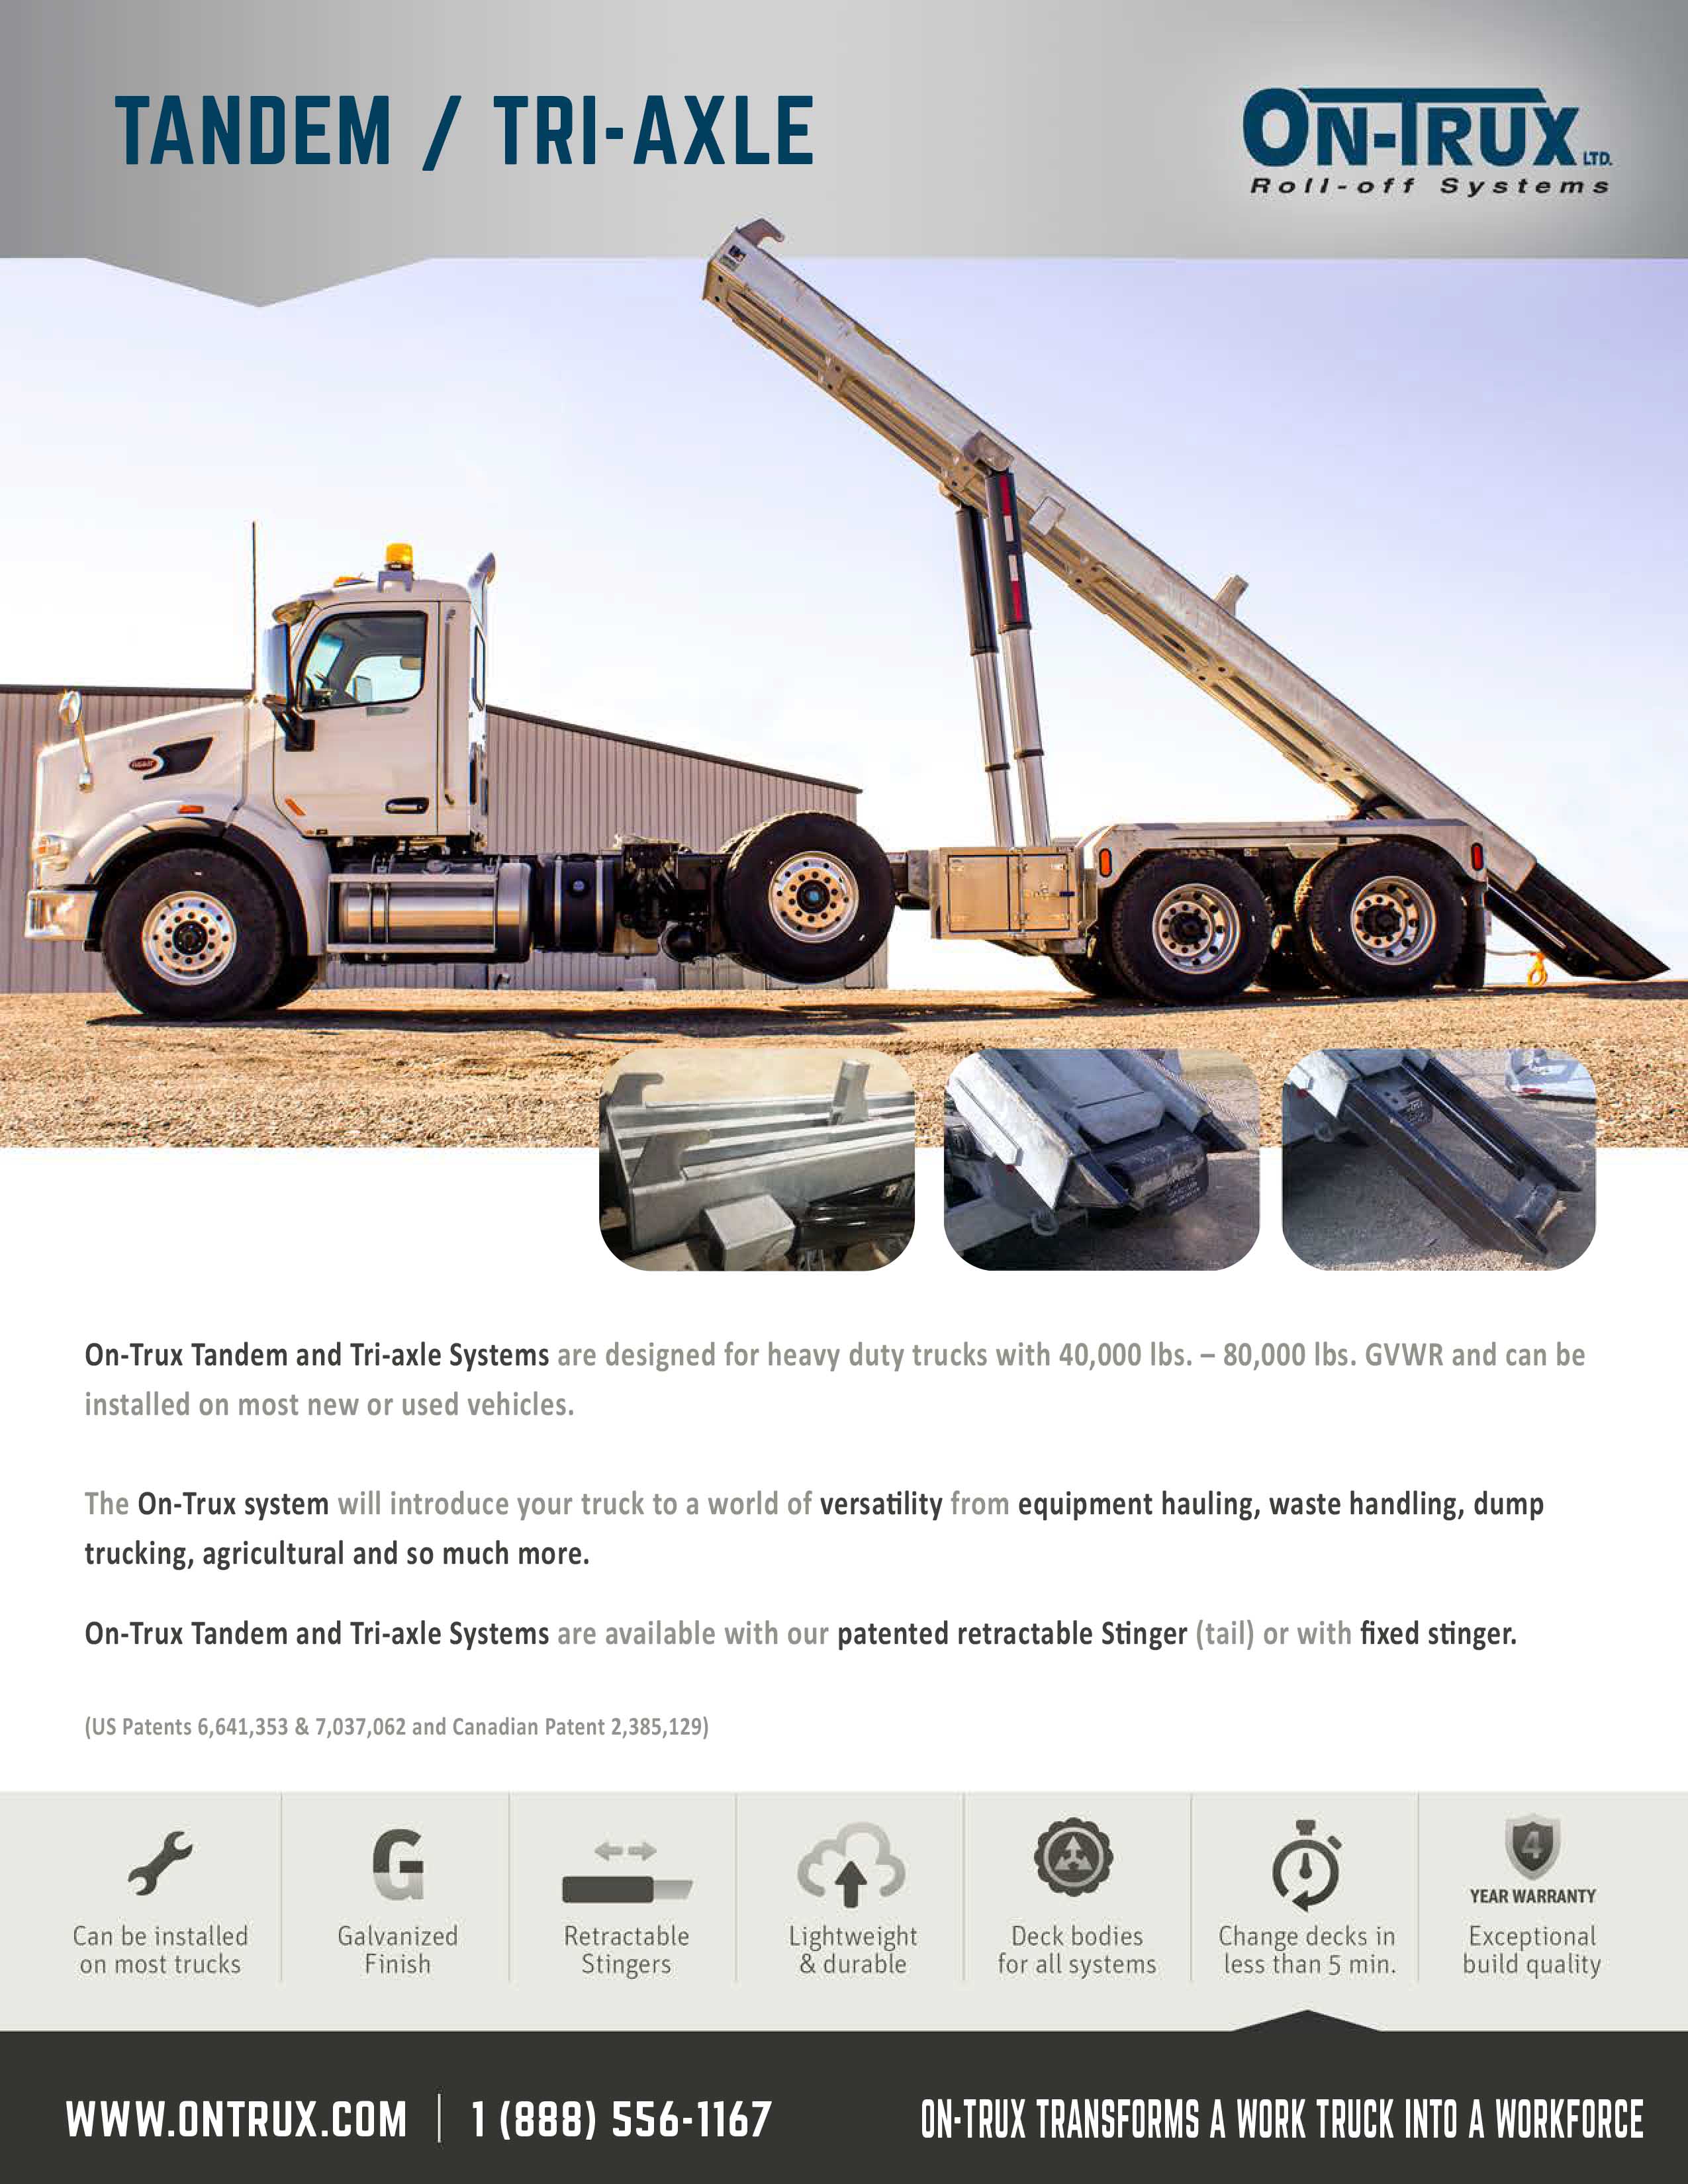 TANDEM AND TRI-AXLE ON-TRUX SYSTEMS